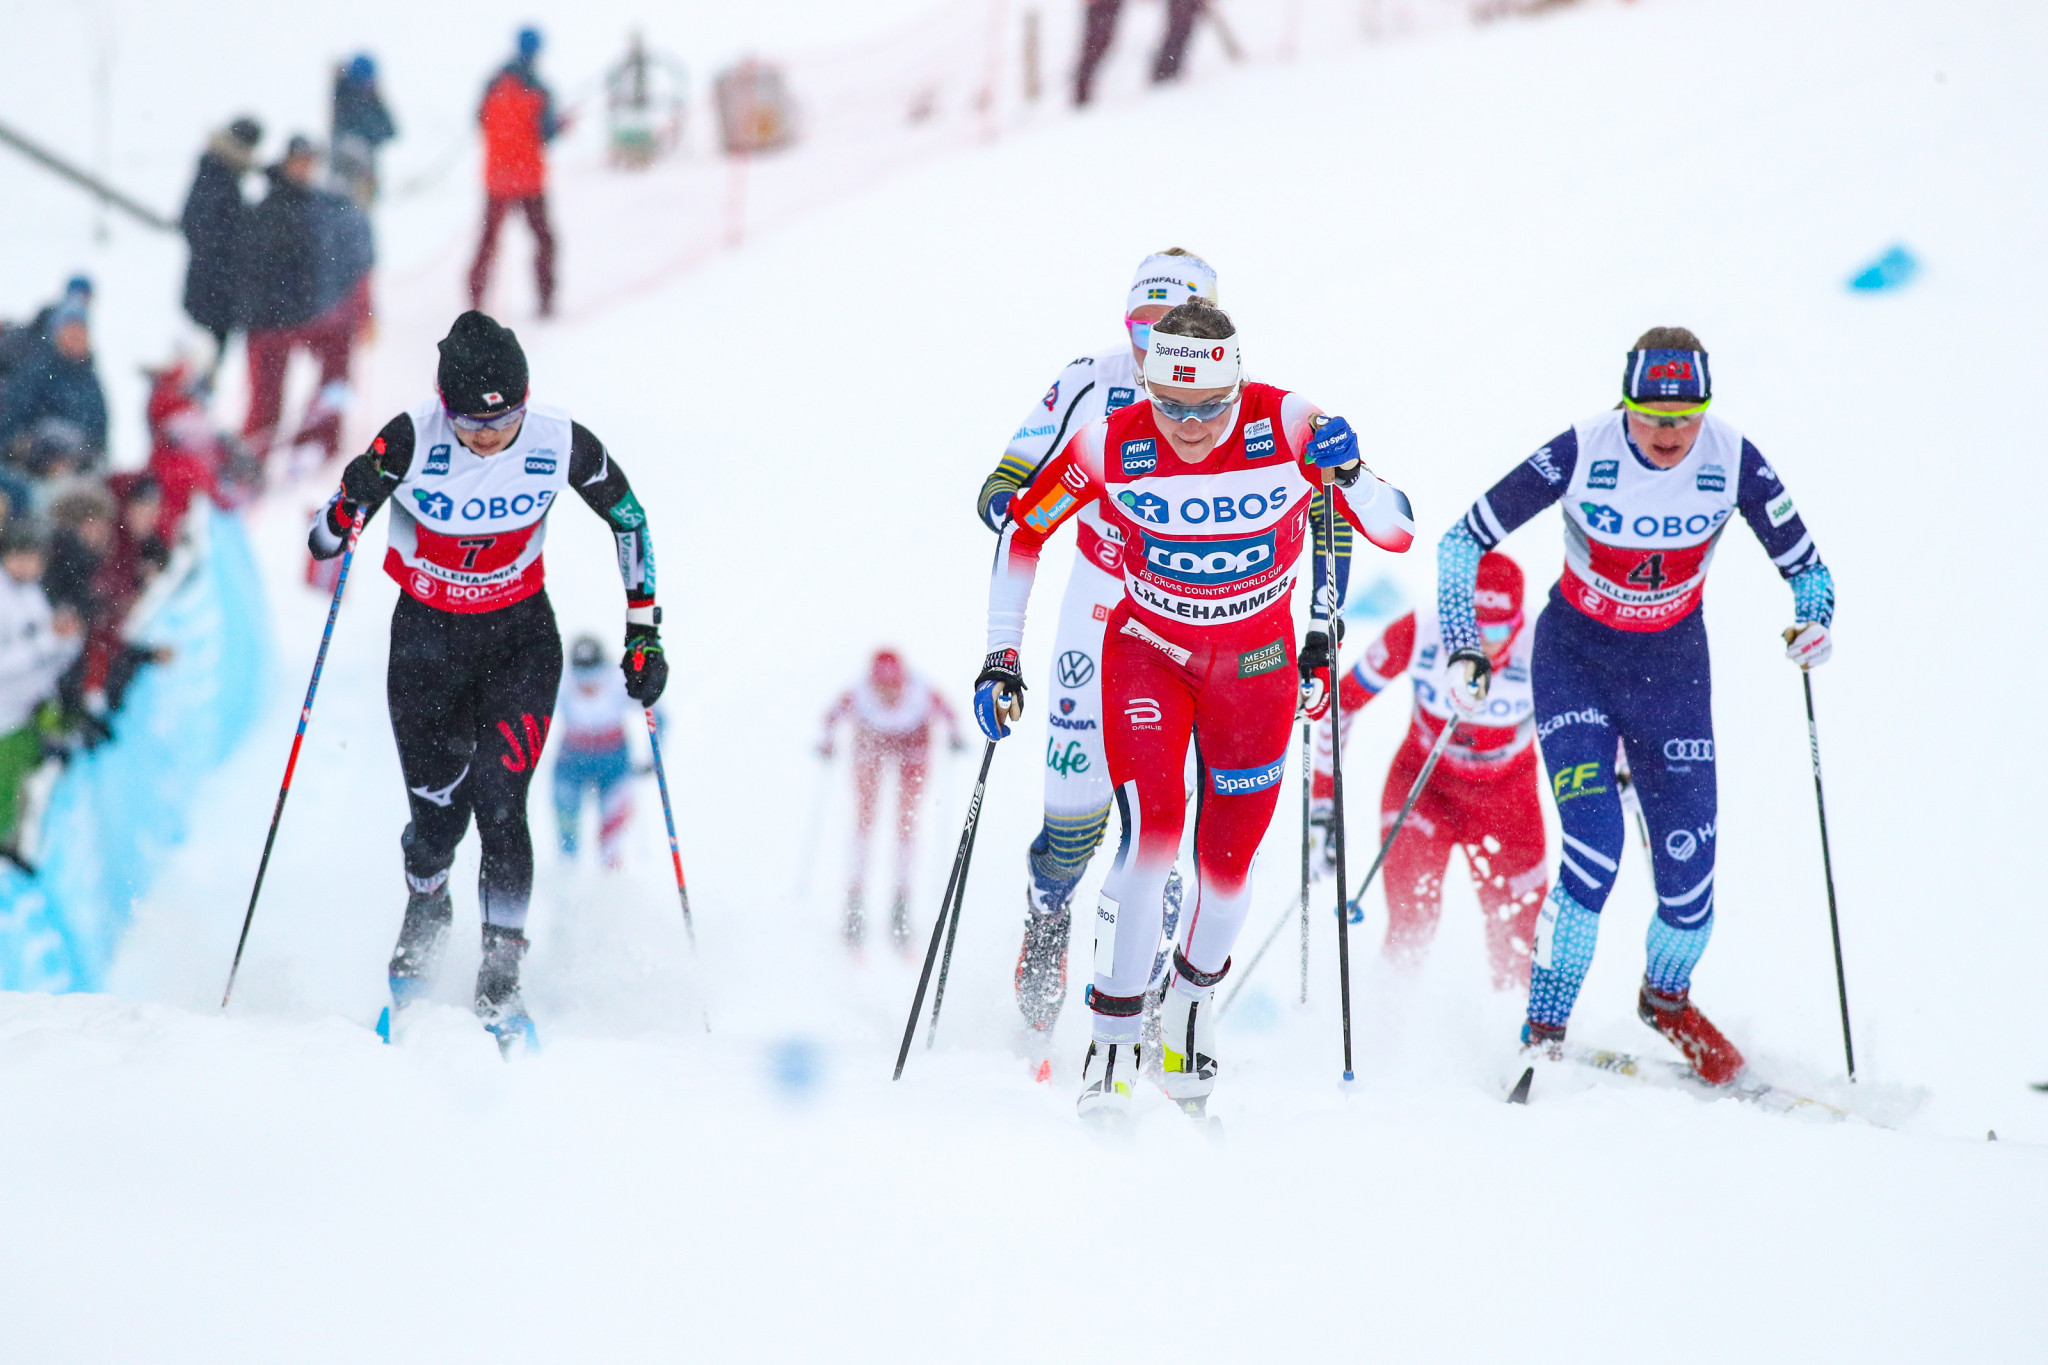 The Norwegian Ski Association and FIS are looking to move the Cross-Country World Cup leg in Lillehammer to later in the season ©Getty Images